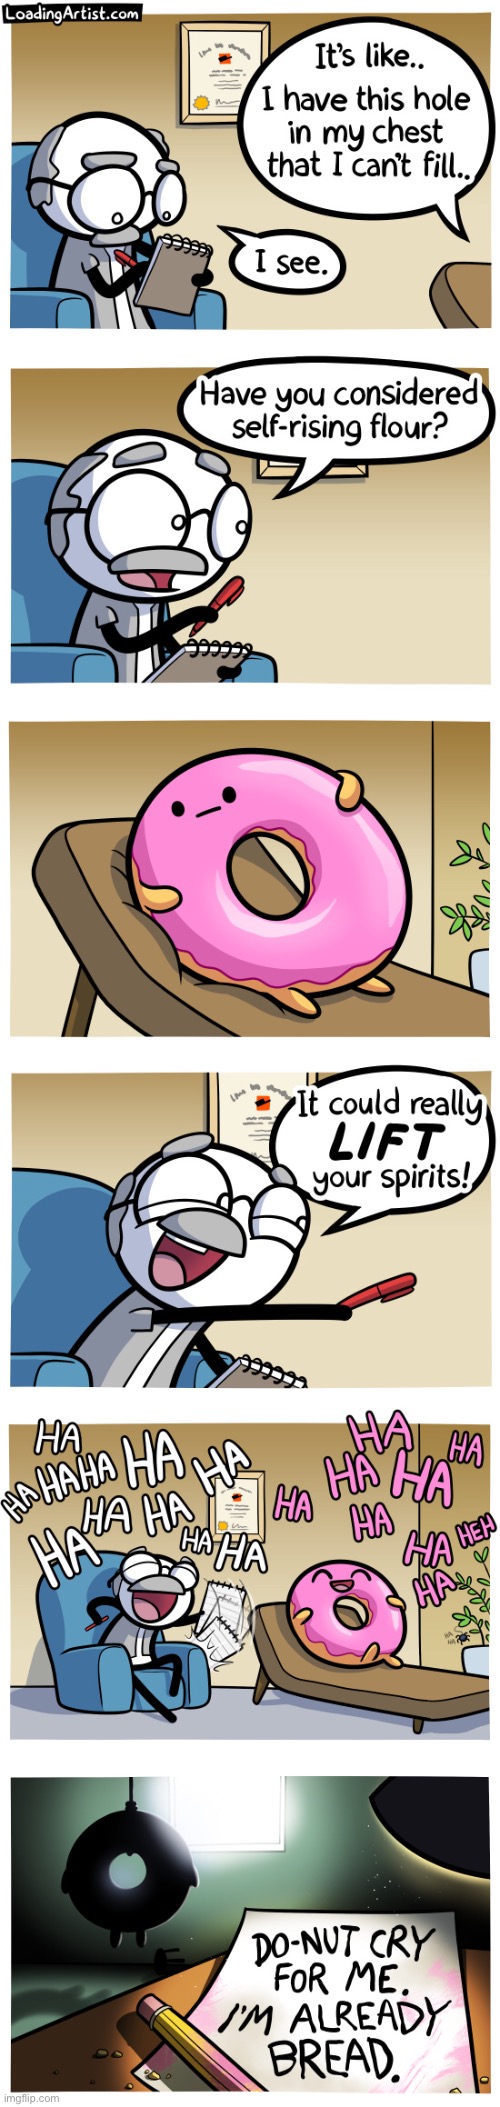 Oh god... | image tagged in memes,funny,comics,donut,bad jokes,lol | made w/ Imgflip meme maker